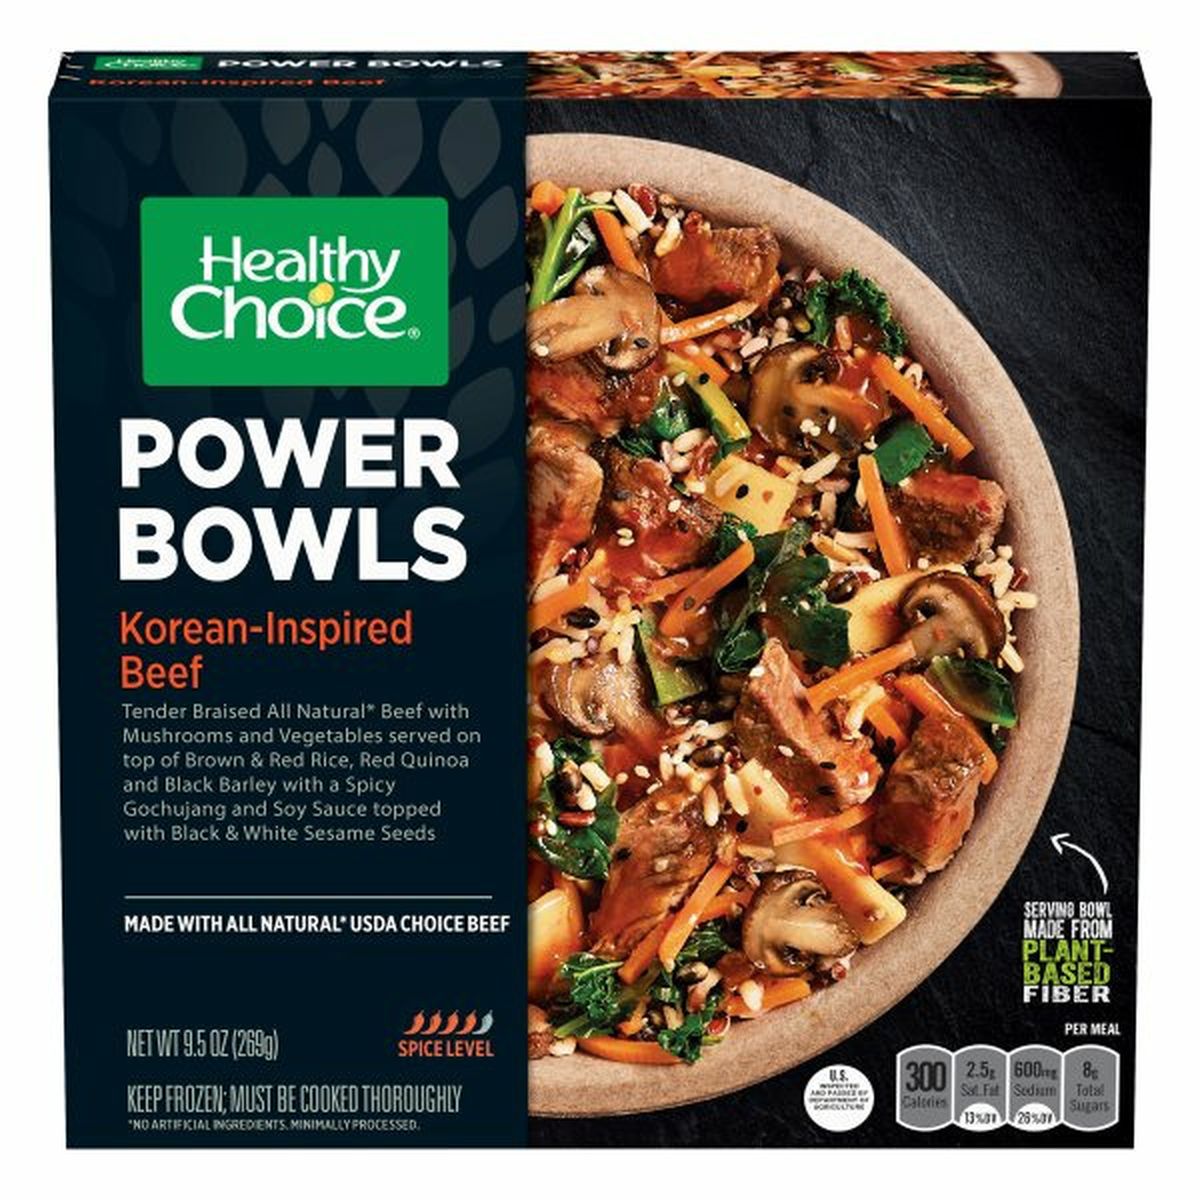 Calories in Healthy Choice Power Bowls, Korean-Inspired Beef